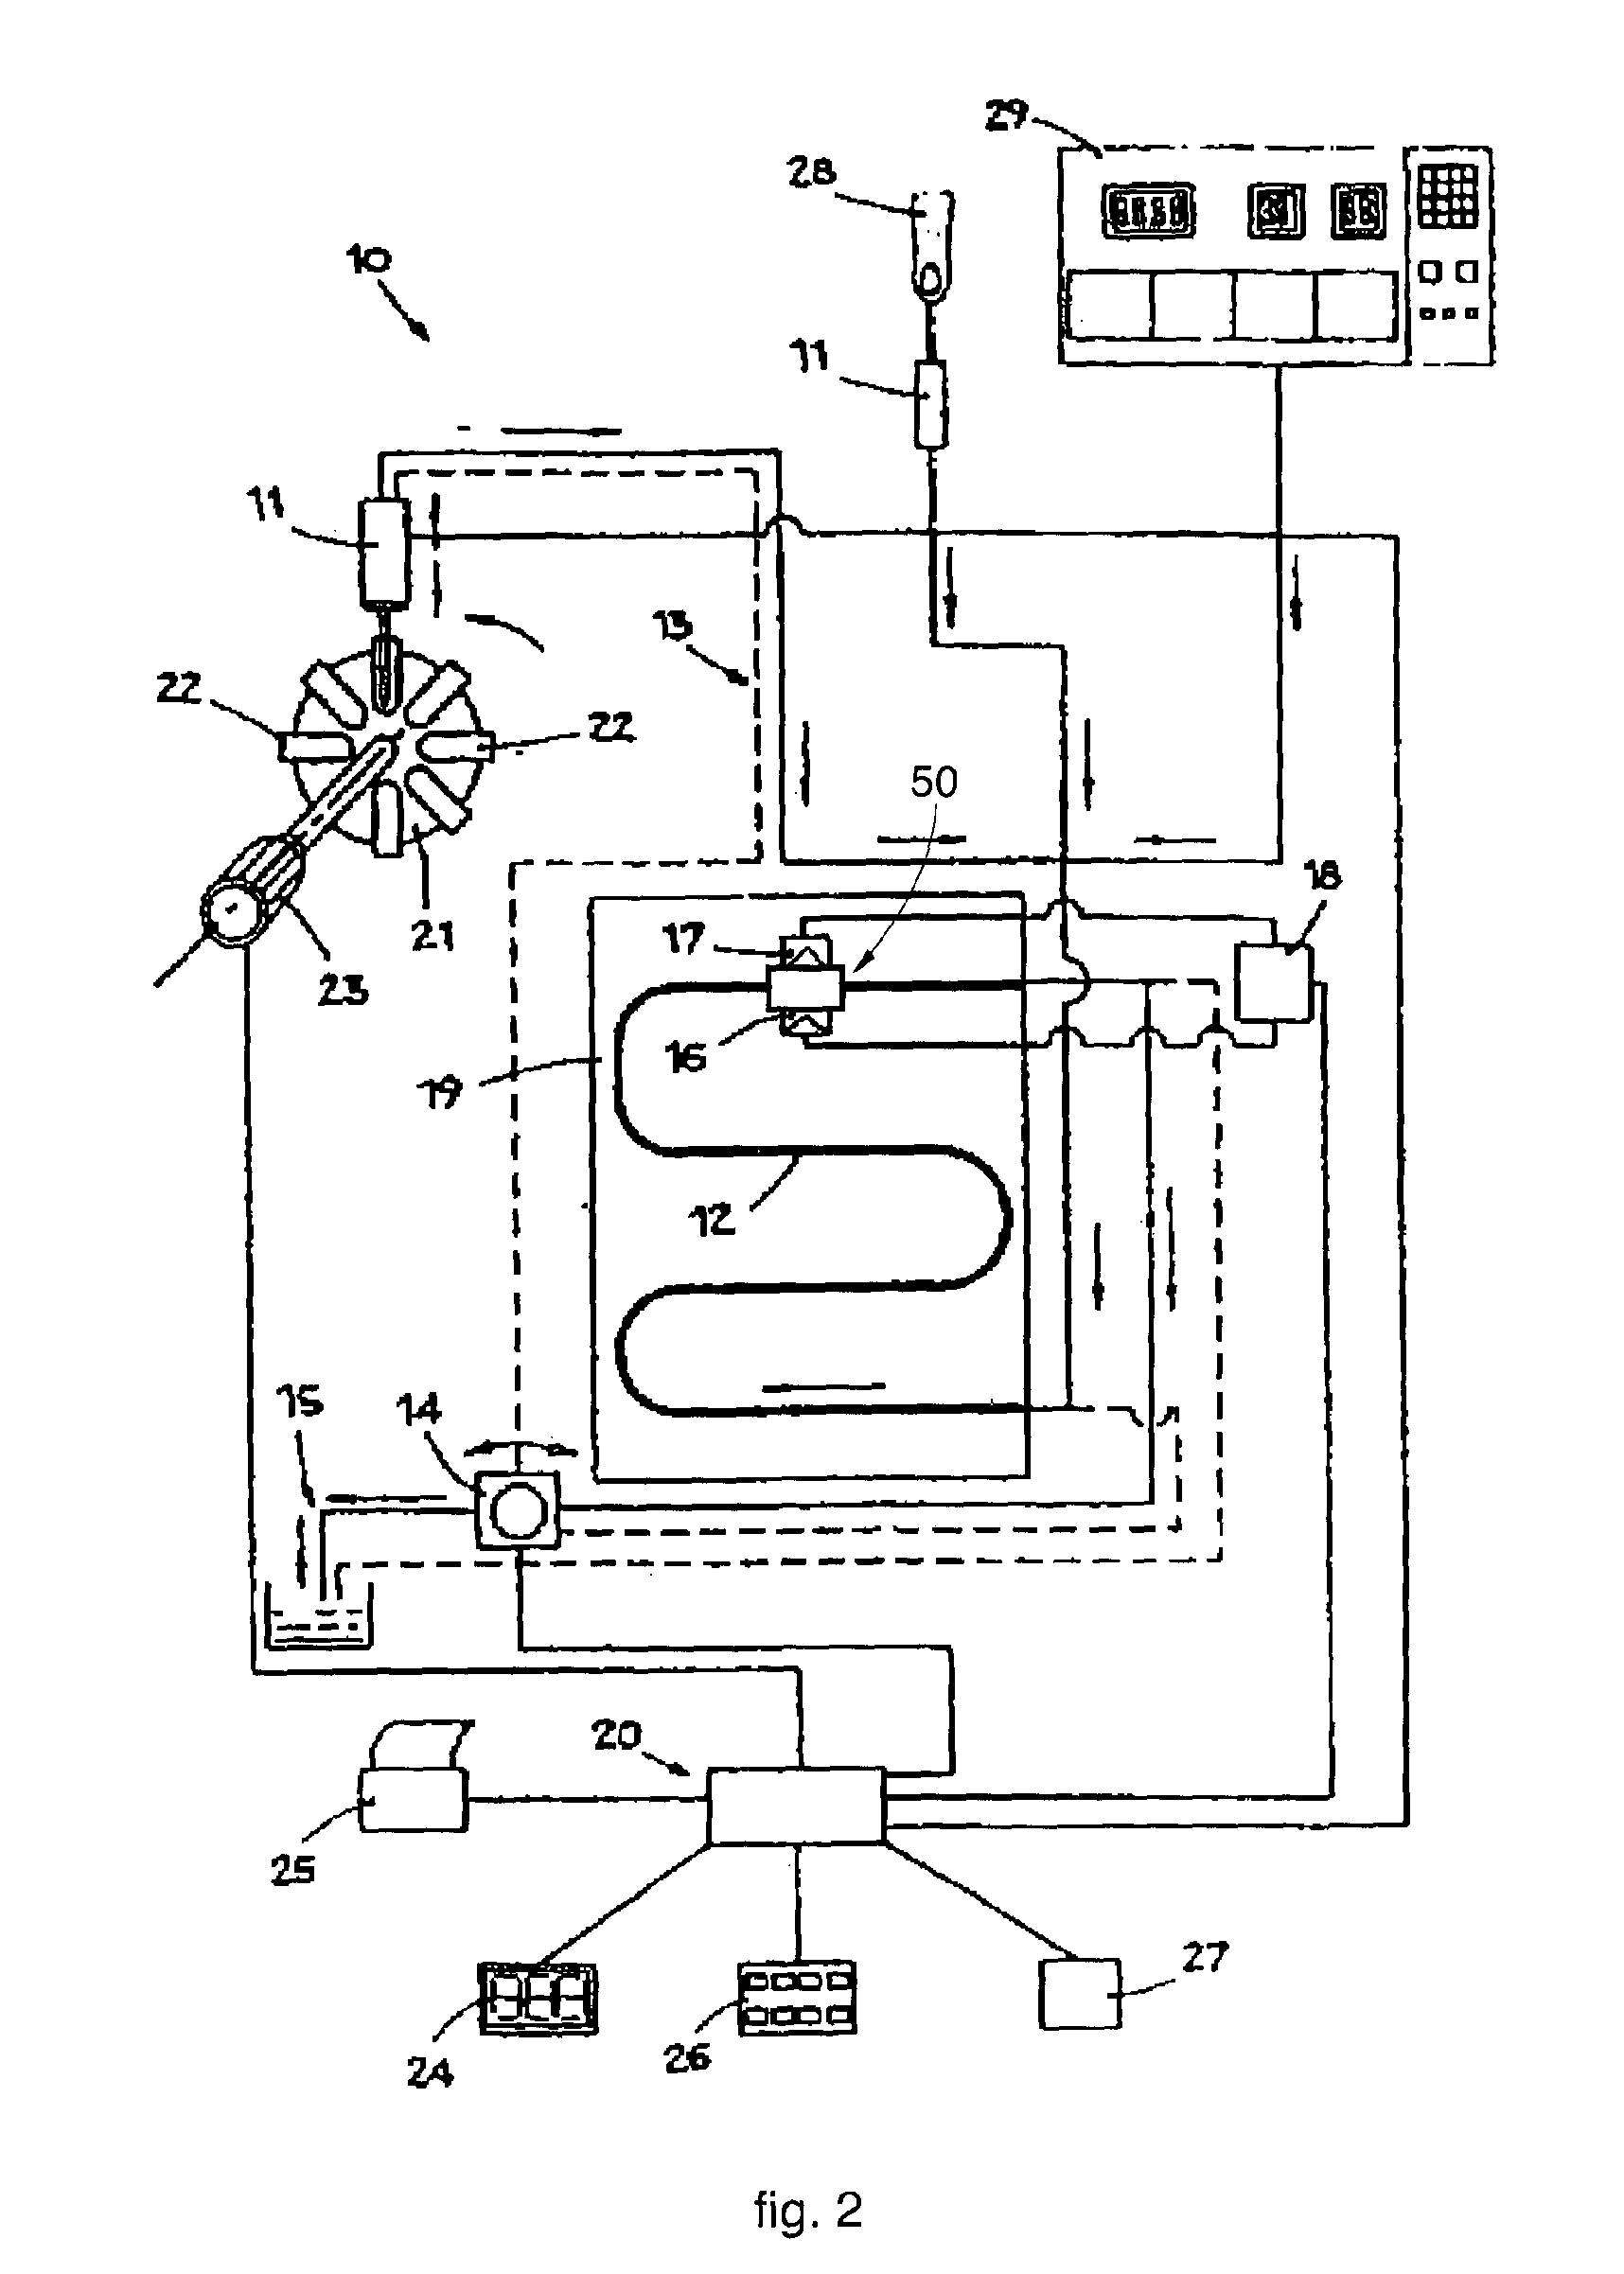 Apparatus and method to determine the blood sedimentation rate and other parameters connected thereto